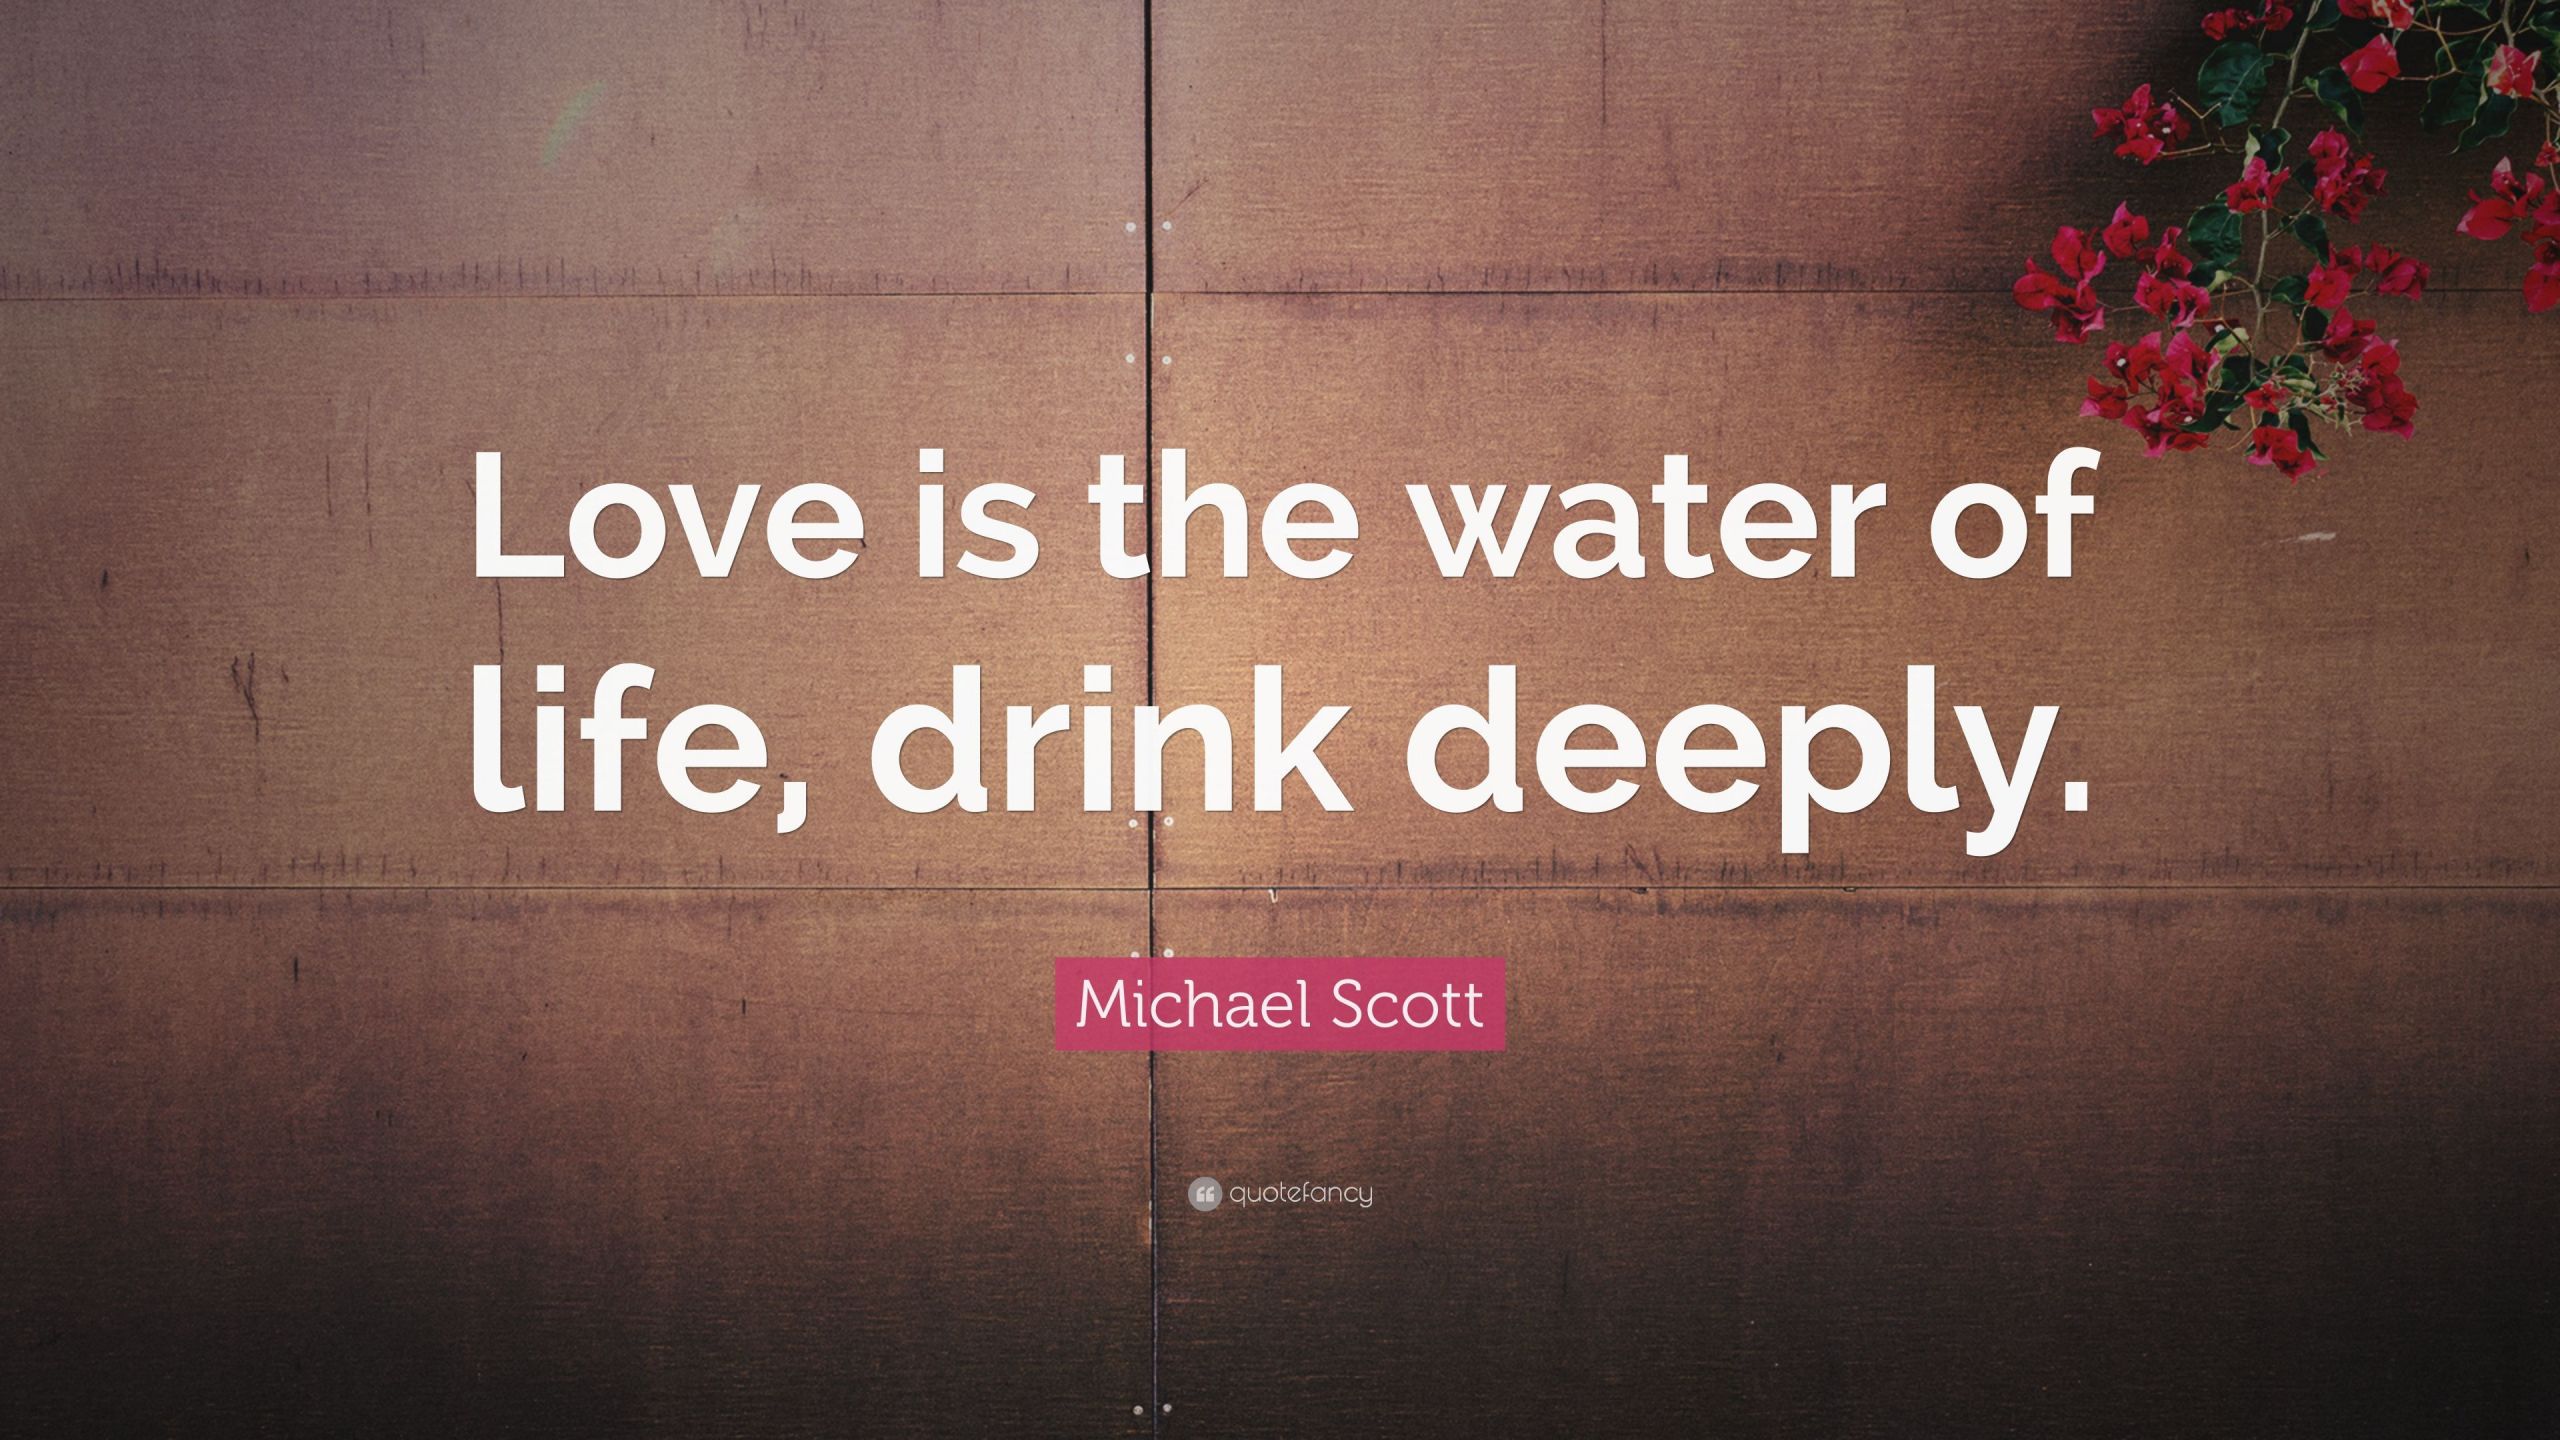 Michael Scott Quotes About Love
 Michael Scott Quote “Love is the water of life drink